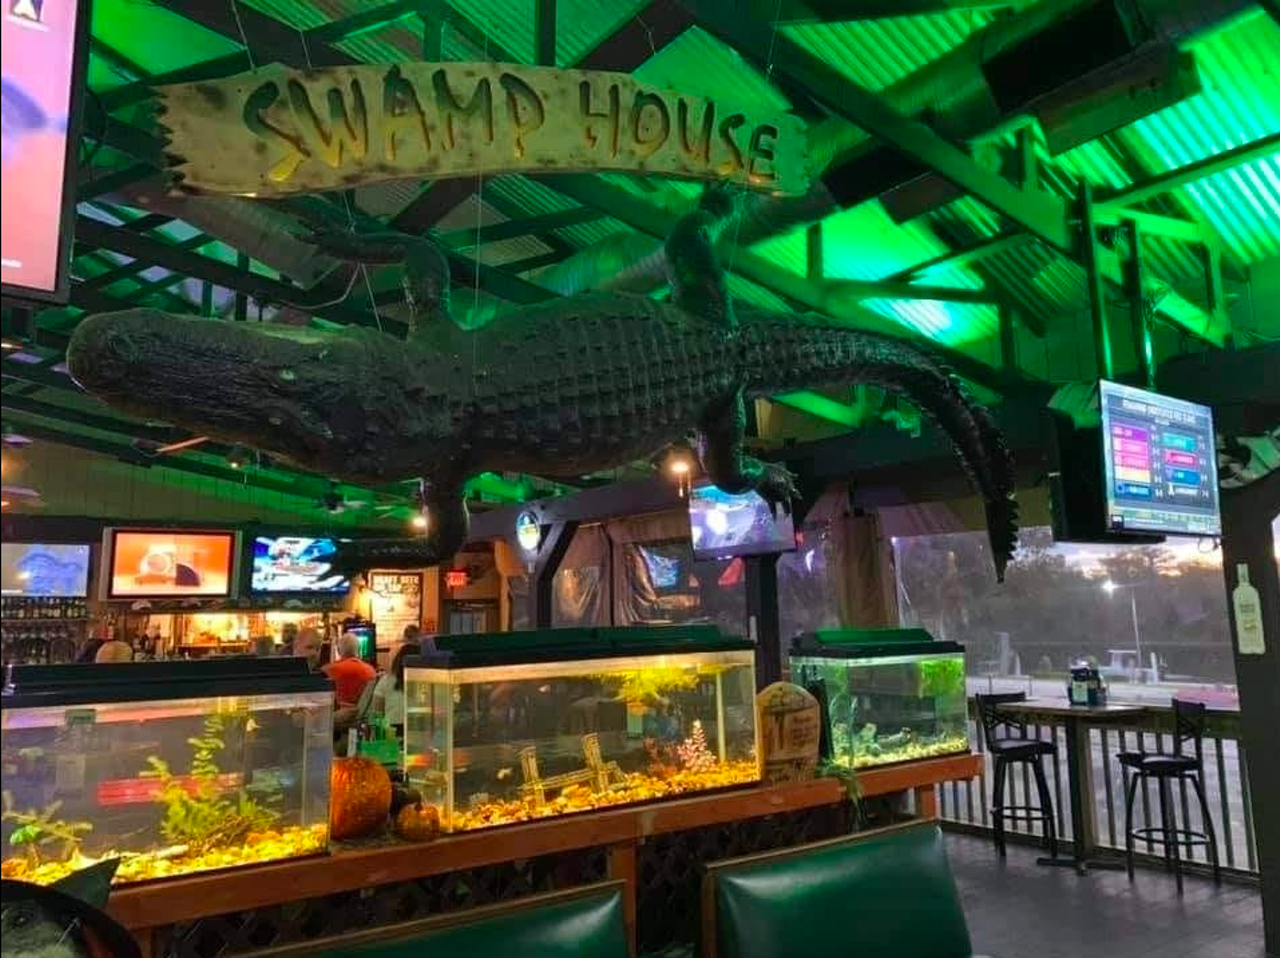 Swamp House Riverfront Grill
488 W. Highbanks Road, DeBary
DeBary's Swamp House boasts a prime location on the St. Johns river, fried seafood, a tiki bar and frequent live music.